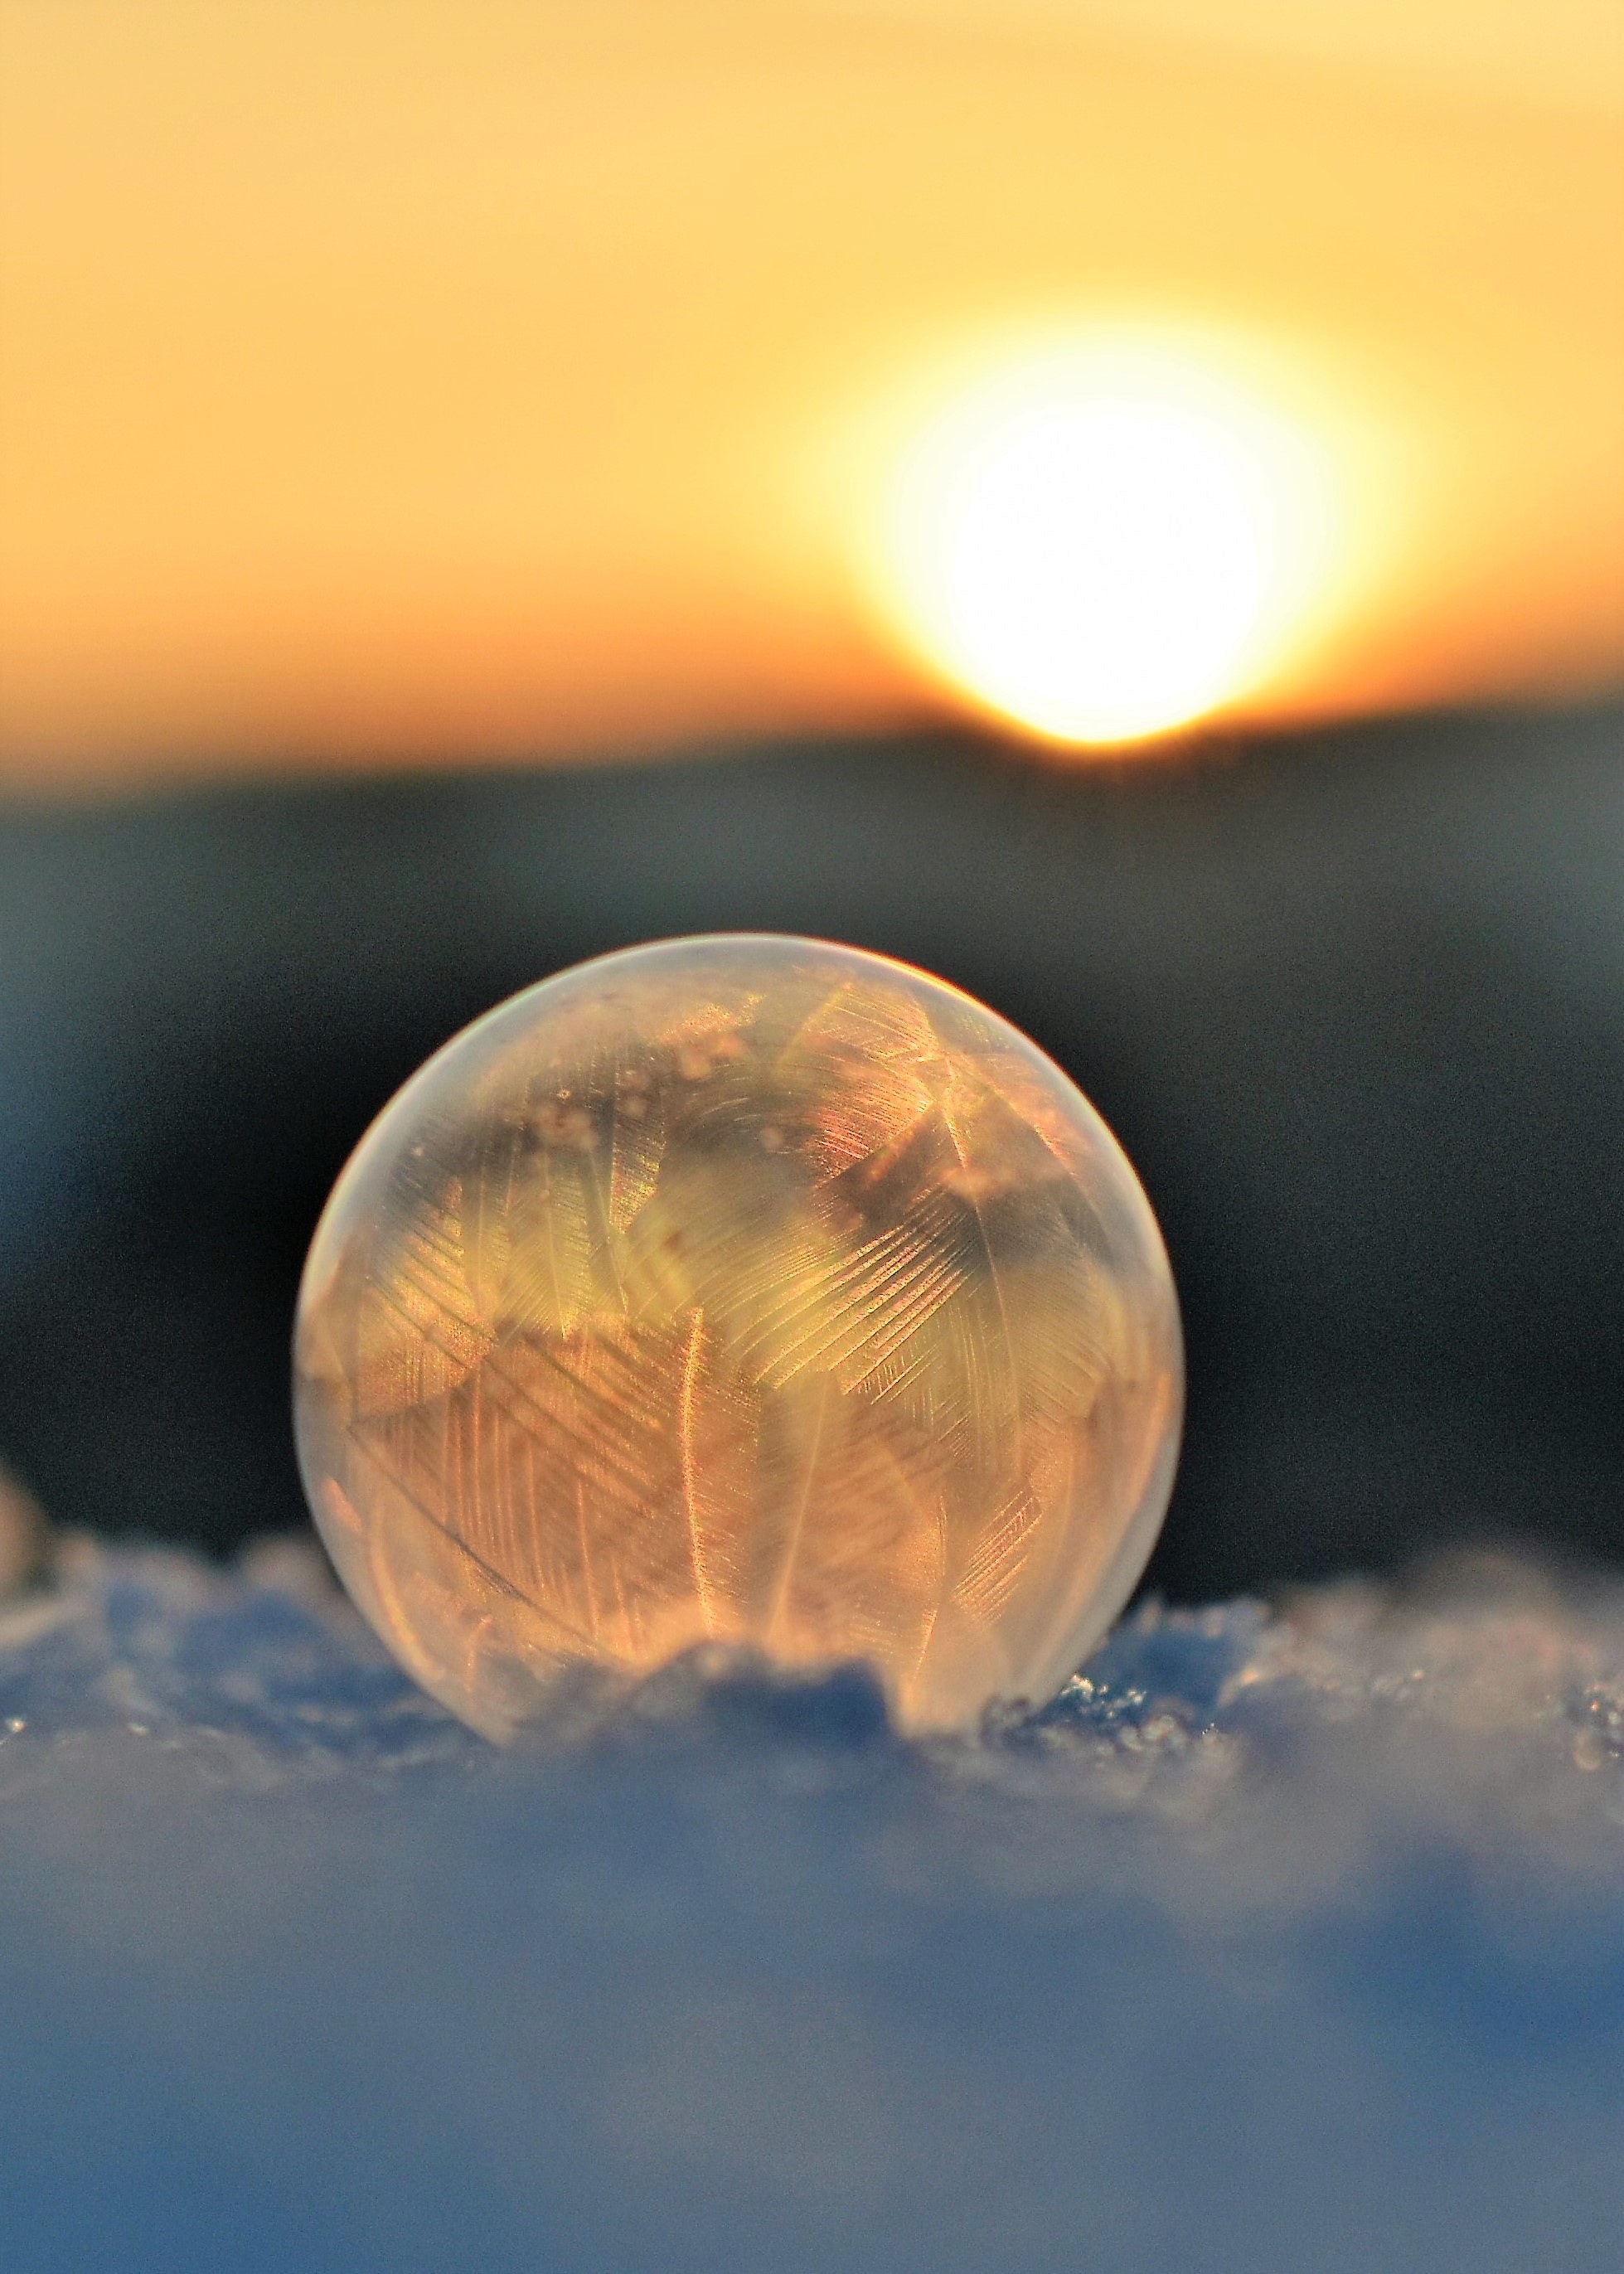 Frozen Soap Bubble Against Sky during Sunset, Light, Winter, Weather, Sunset, HQ Photo